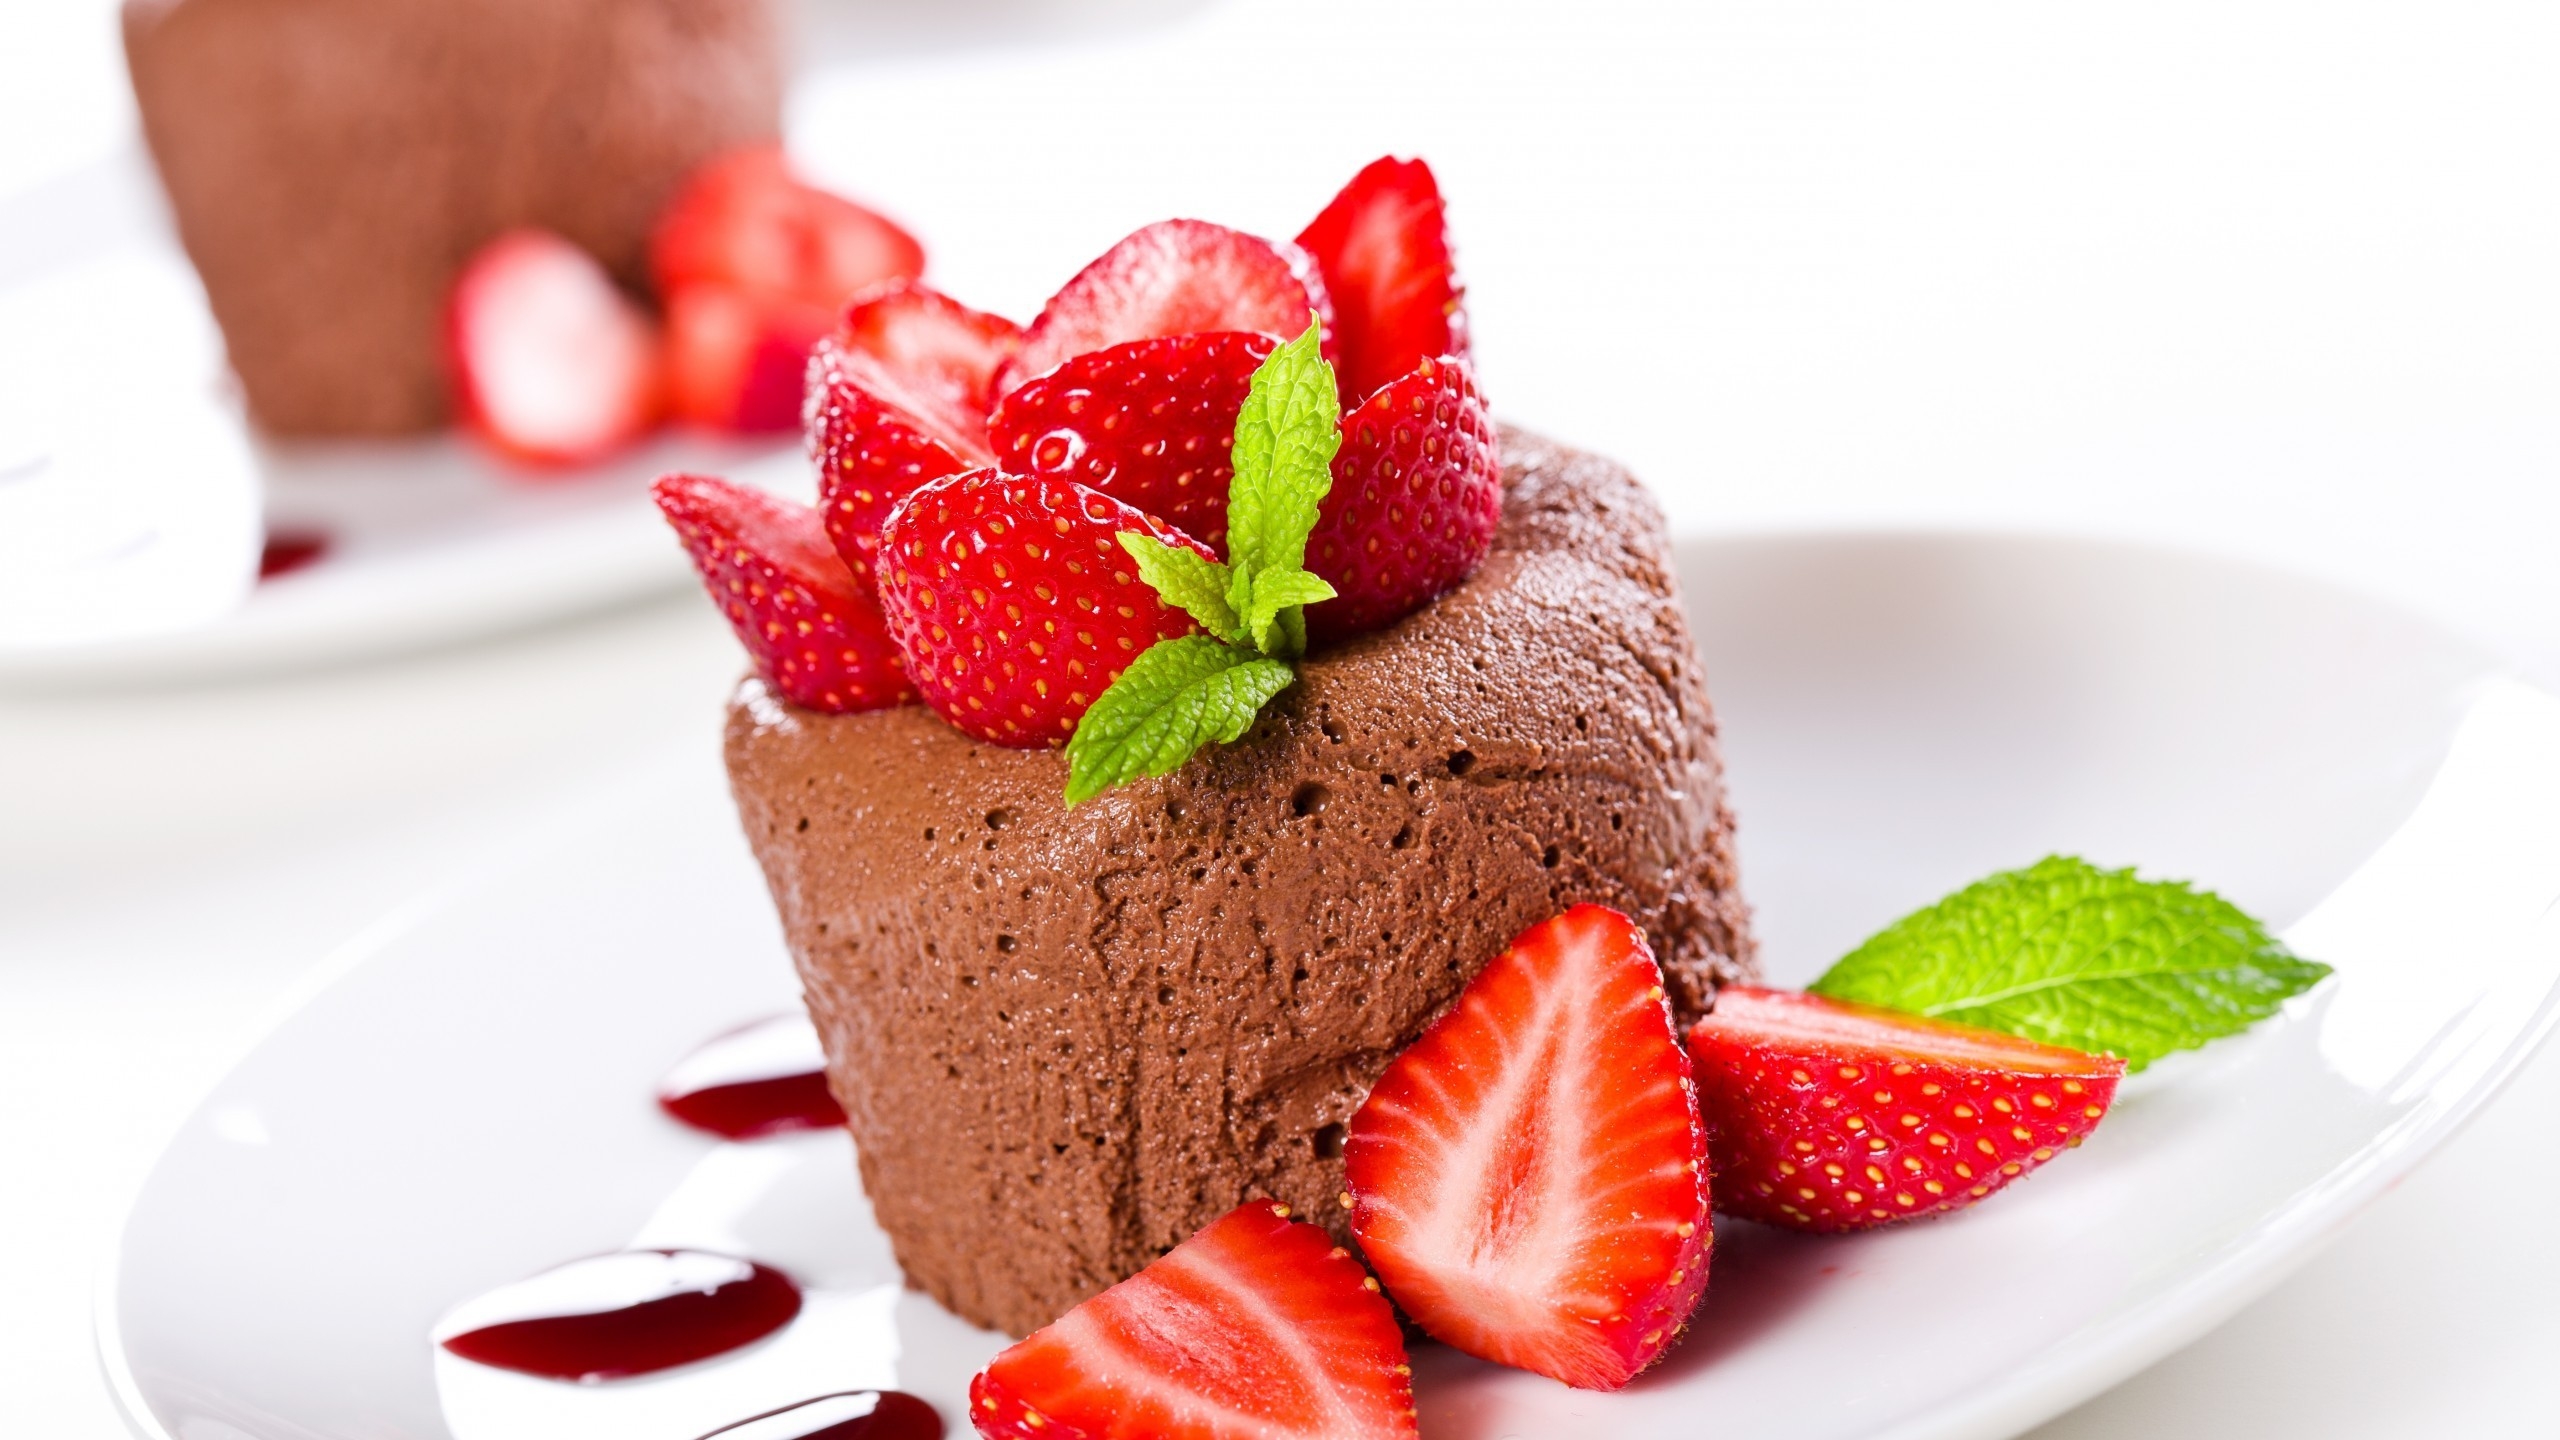 Chocolate Mousse for 2560x1440 HDTV resolution